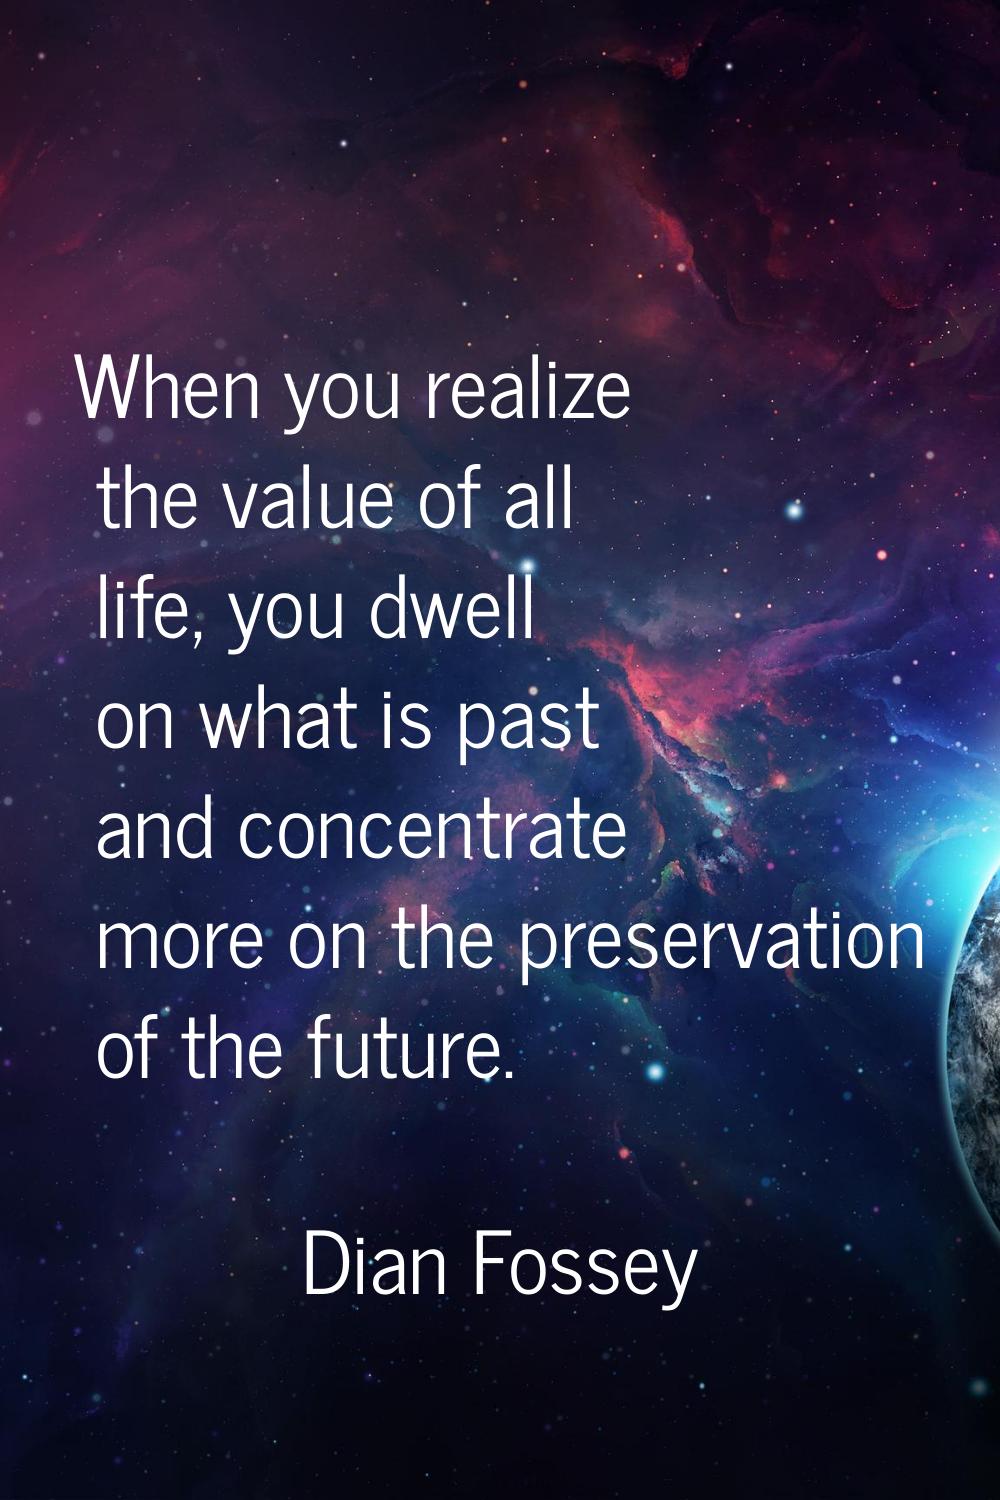 When you realize the value of all life, you dwell on what is past and concentrate more on the prese